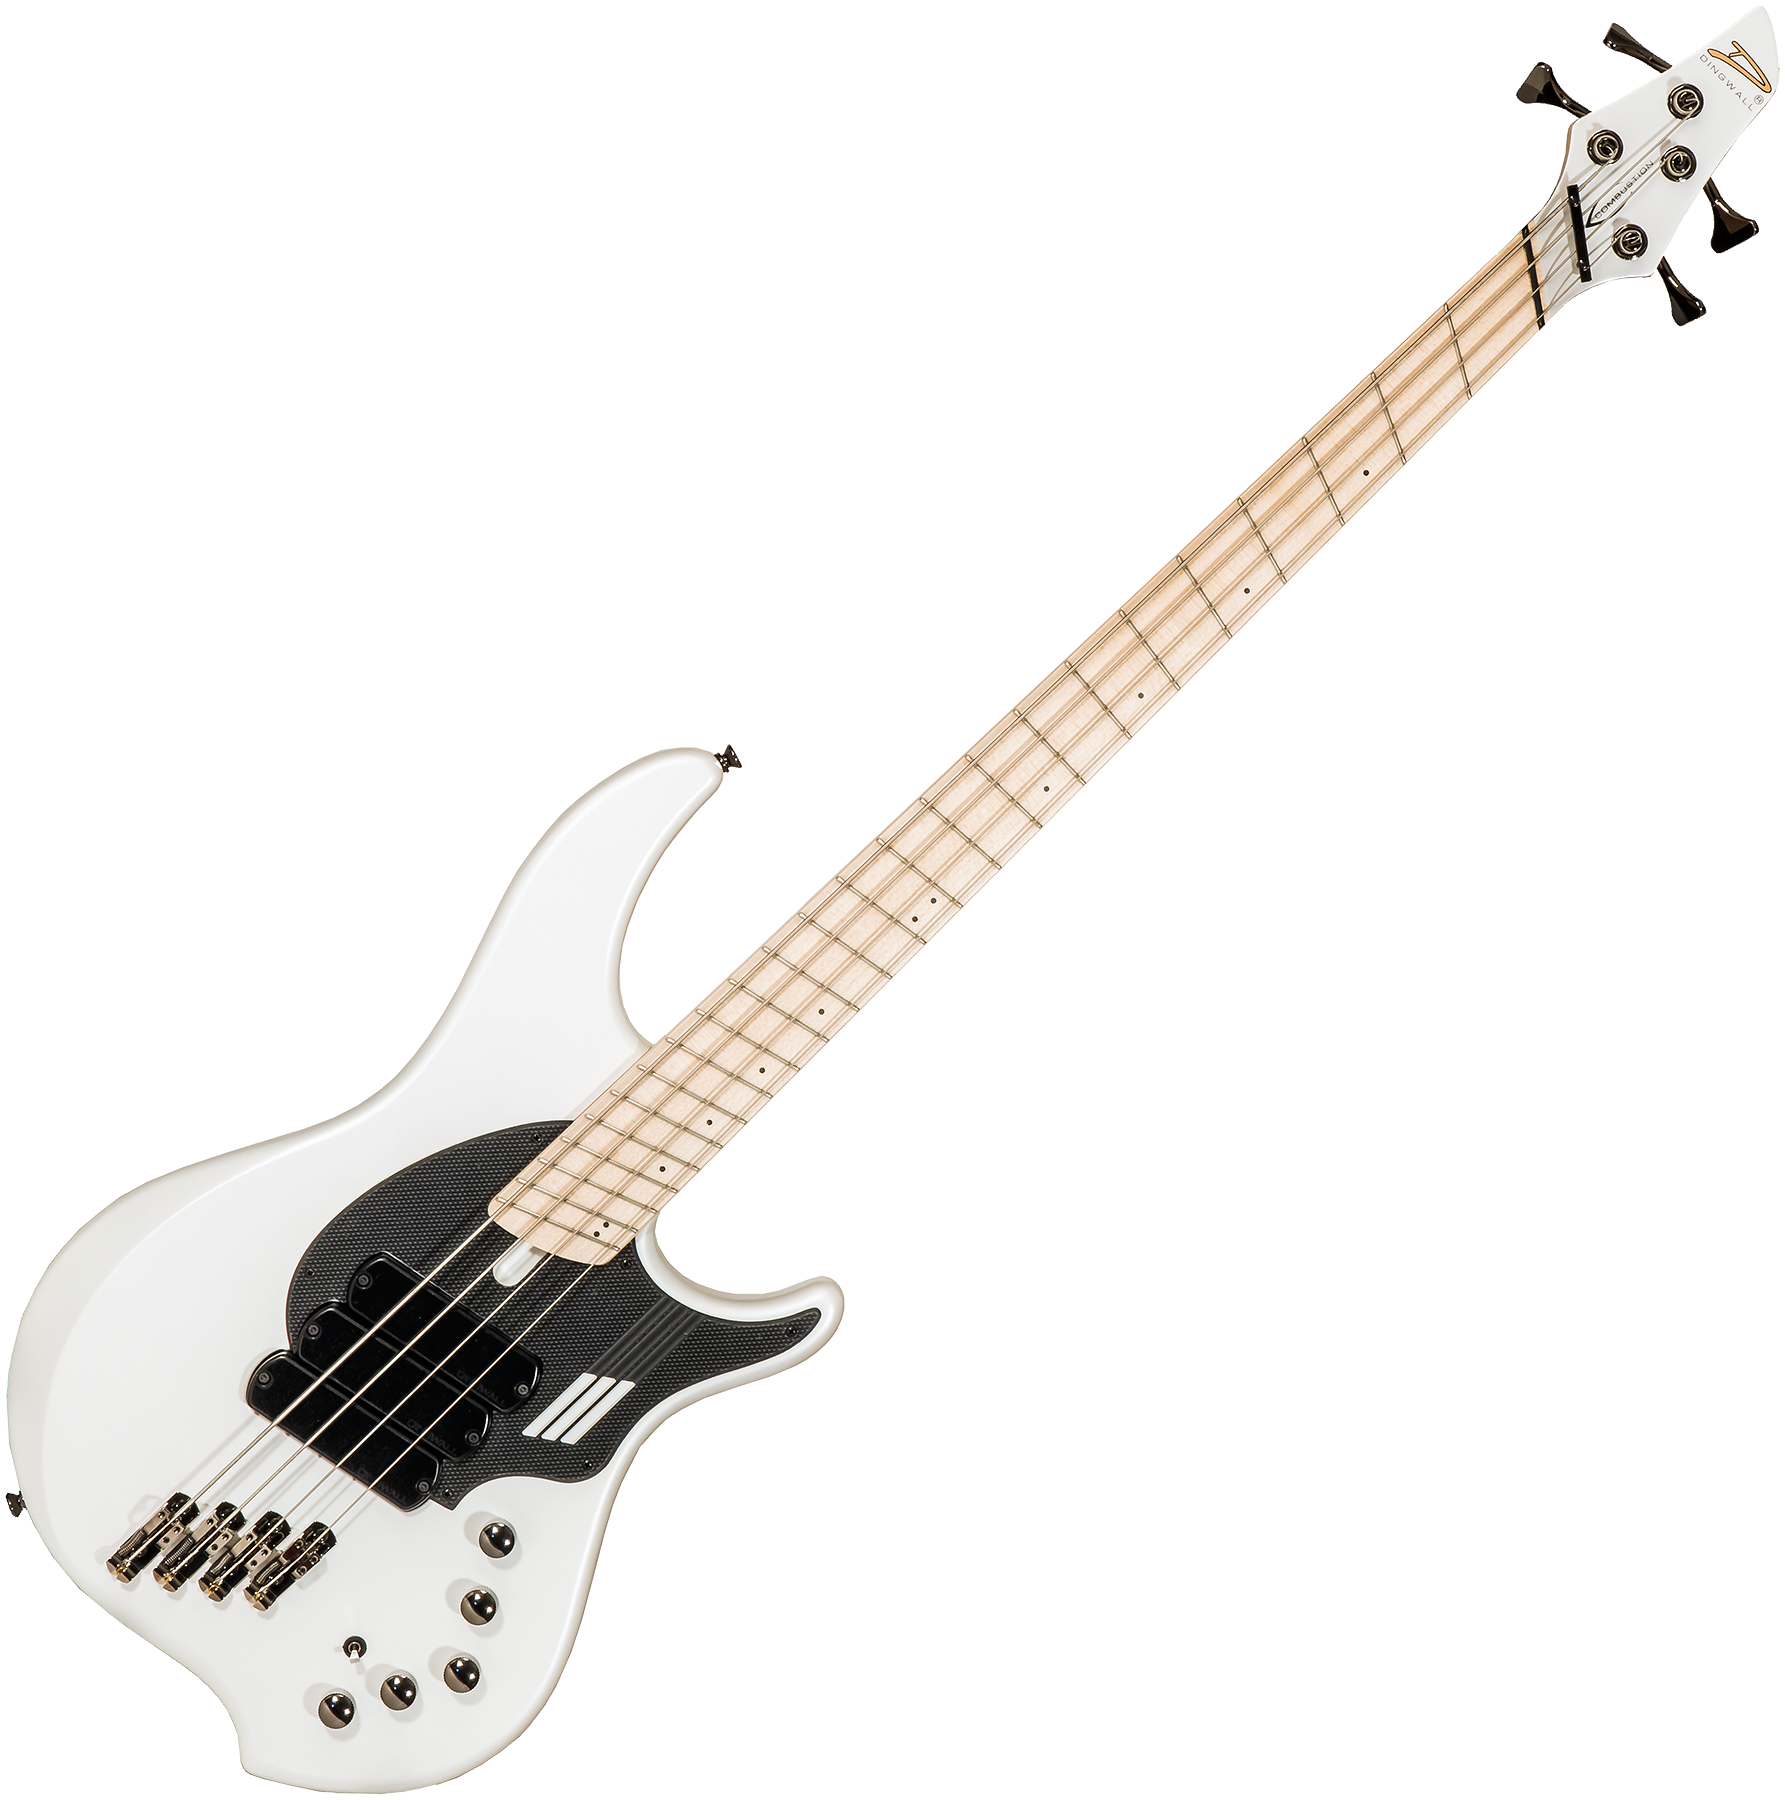 Dingwall Adam Nolly Getgood Ng3 4c 3pu Signature Active Mn - Ducati Pearl White - Solid body electric bass - Variation 1